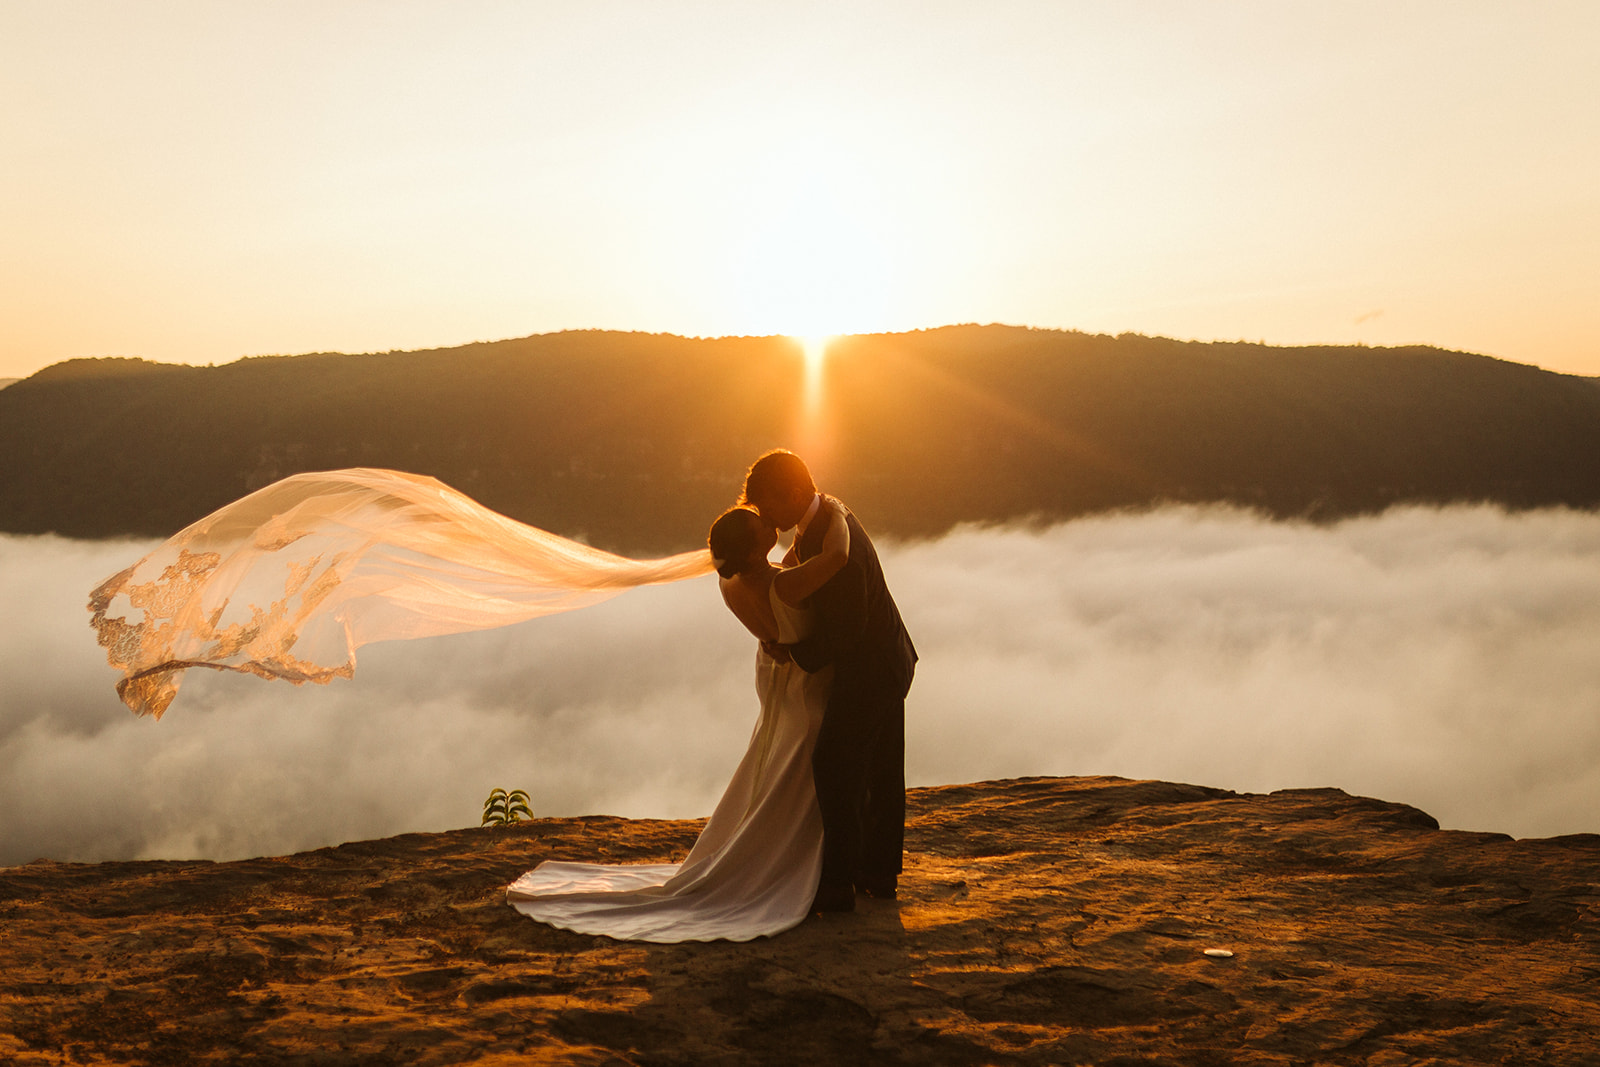 A bride and groom kiss under the setting sun on a mountain ridge. Her veil blows behind her in the wind.